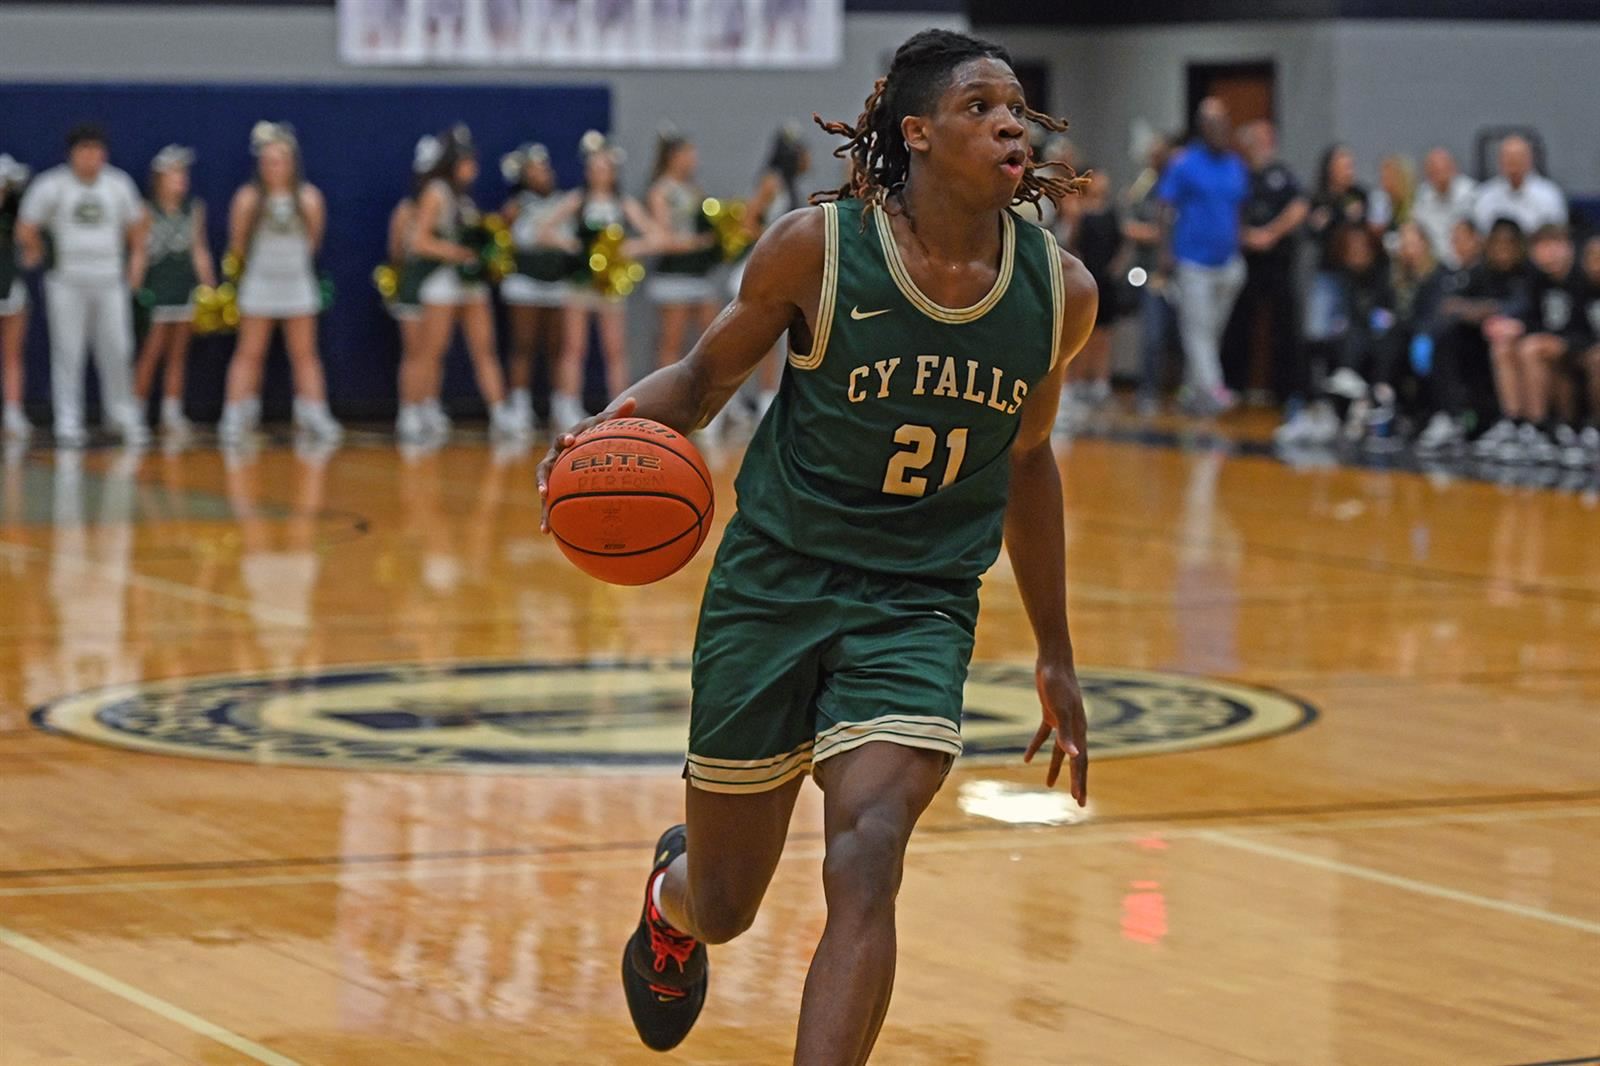 District 16-6A boys’ basketball coaches released the 2021-2022 All-District Boys’ Basketball Team.